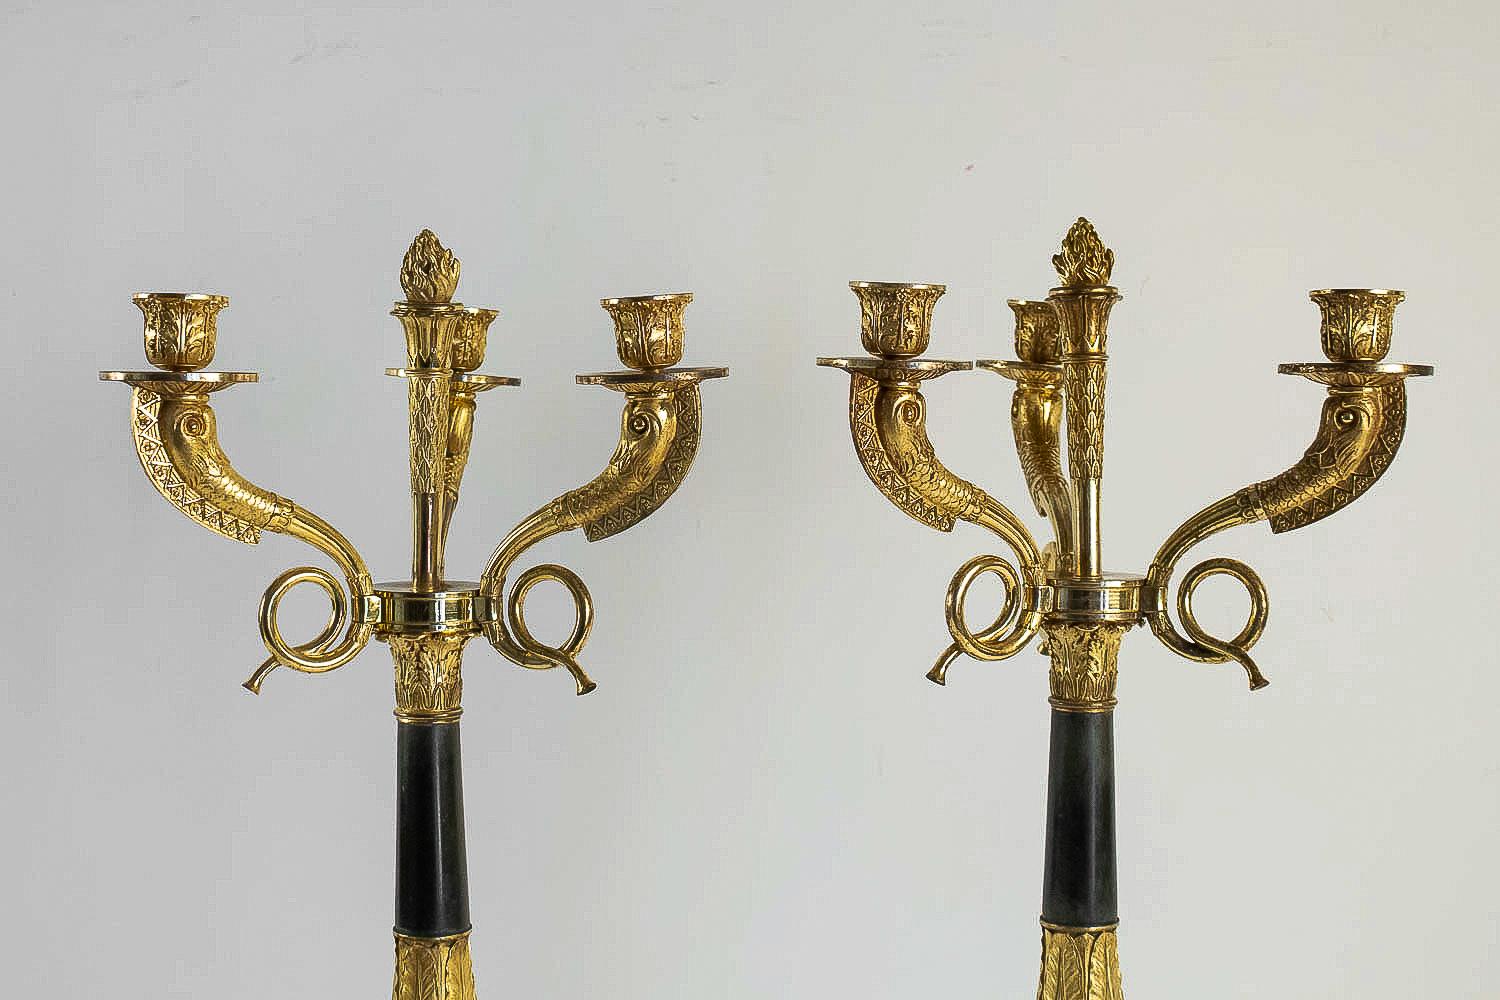 Large Pair of French Empire or Restauration Period Candelabra, circa 1815-1830 For Sale 8